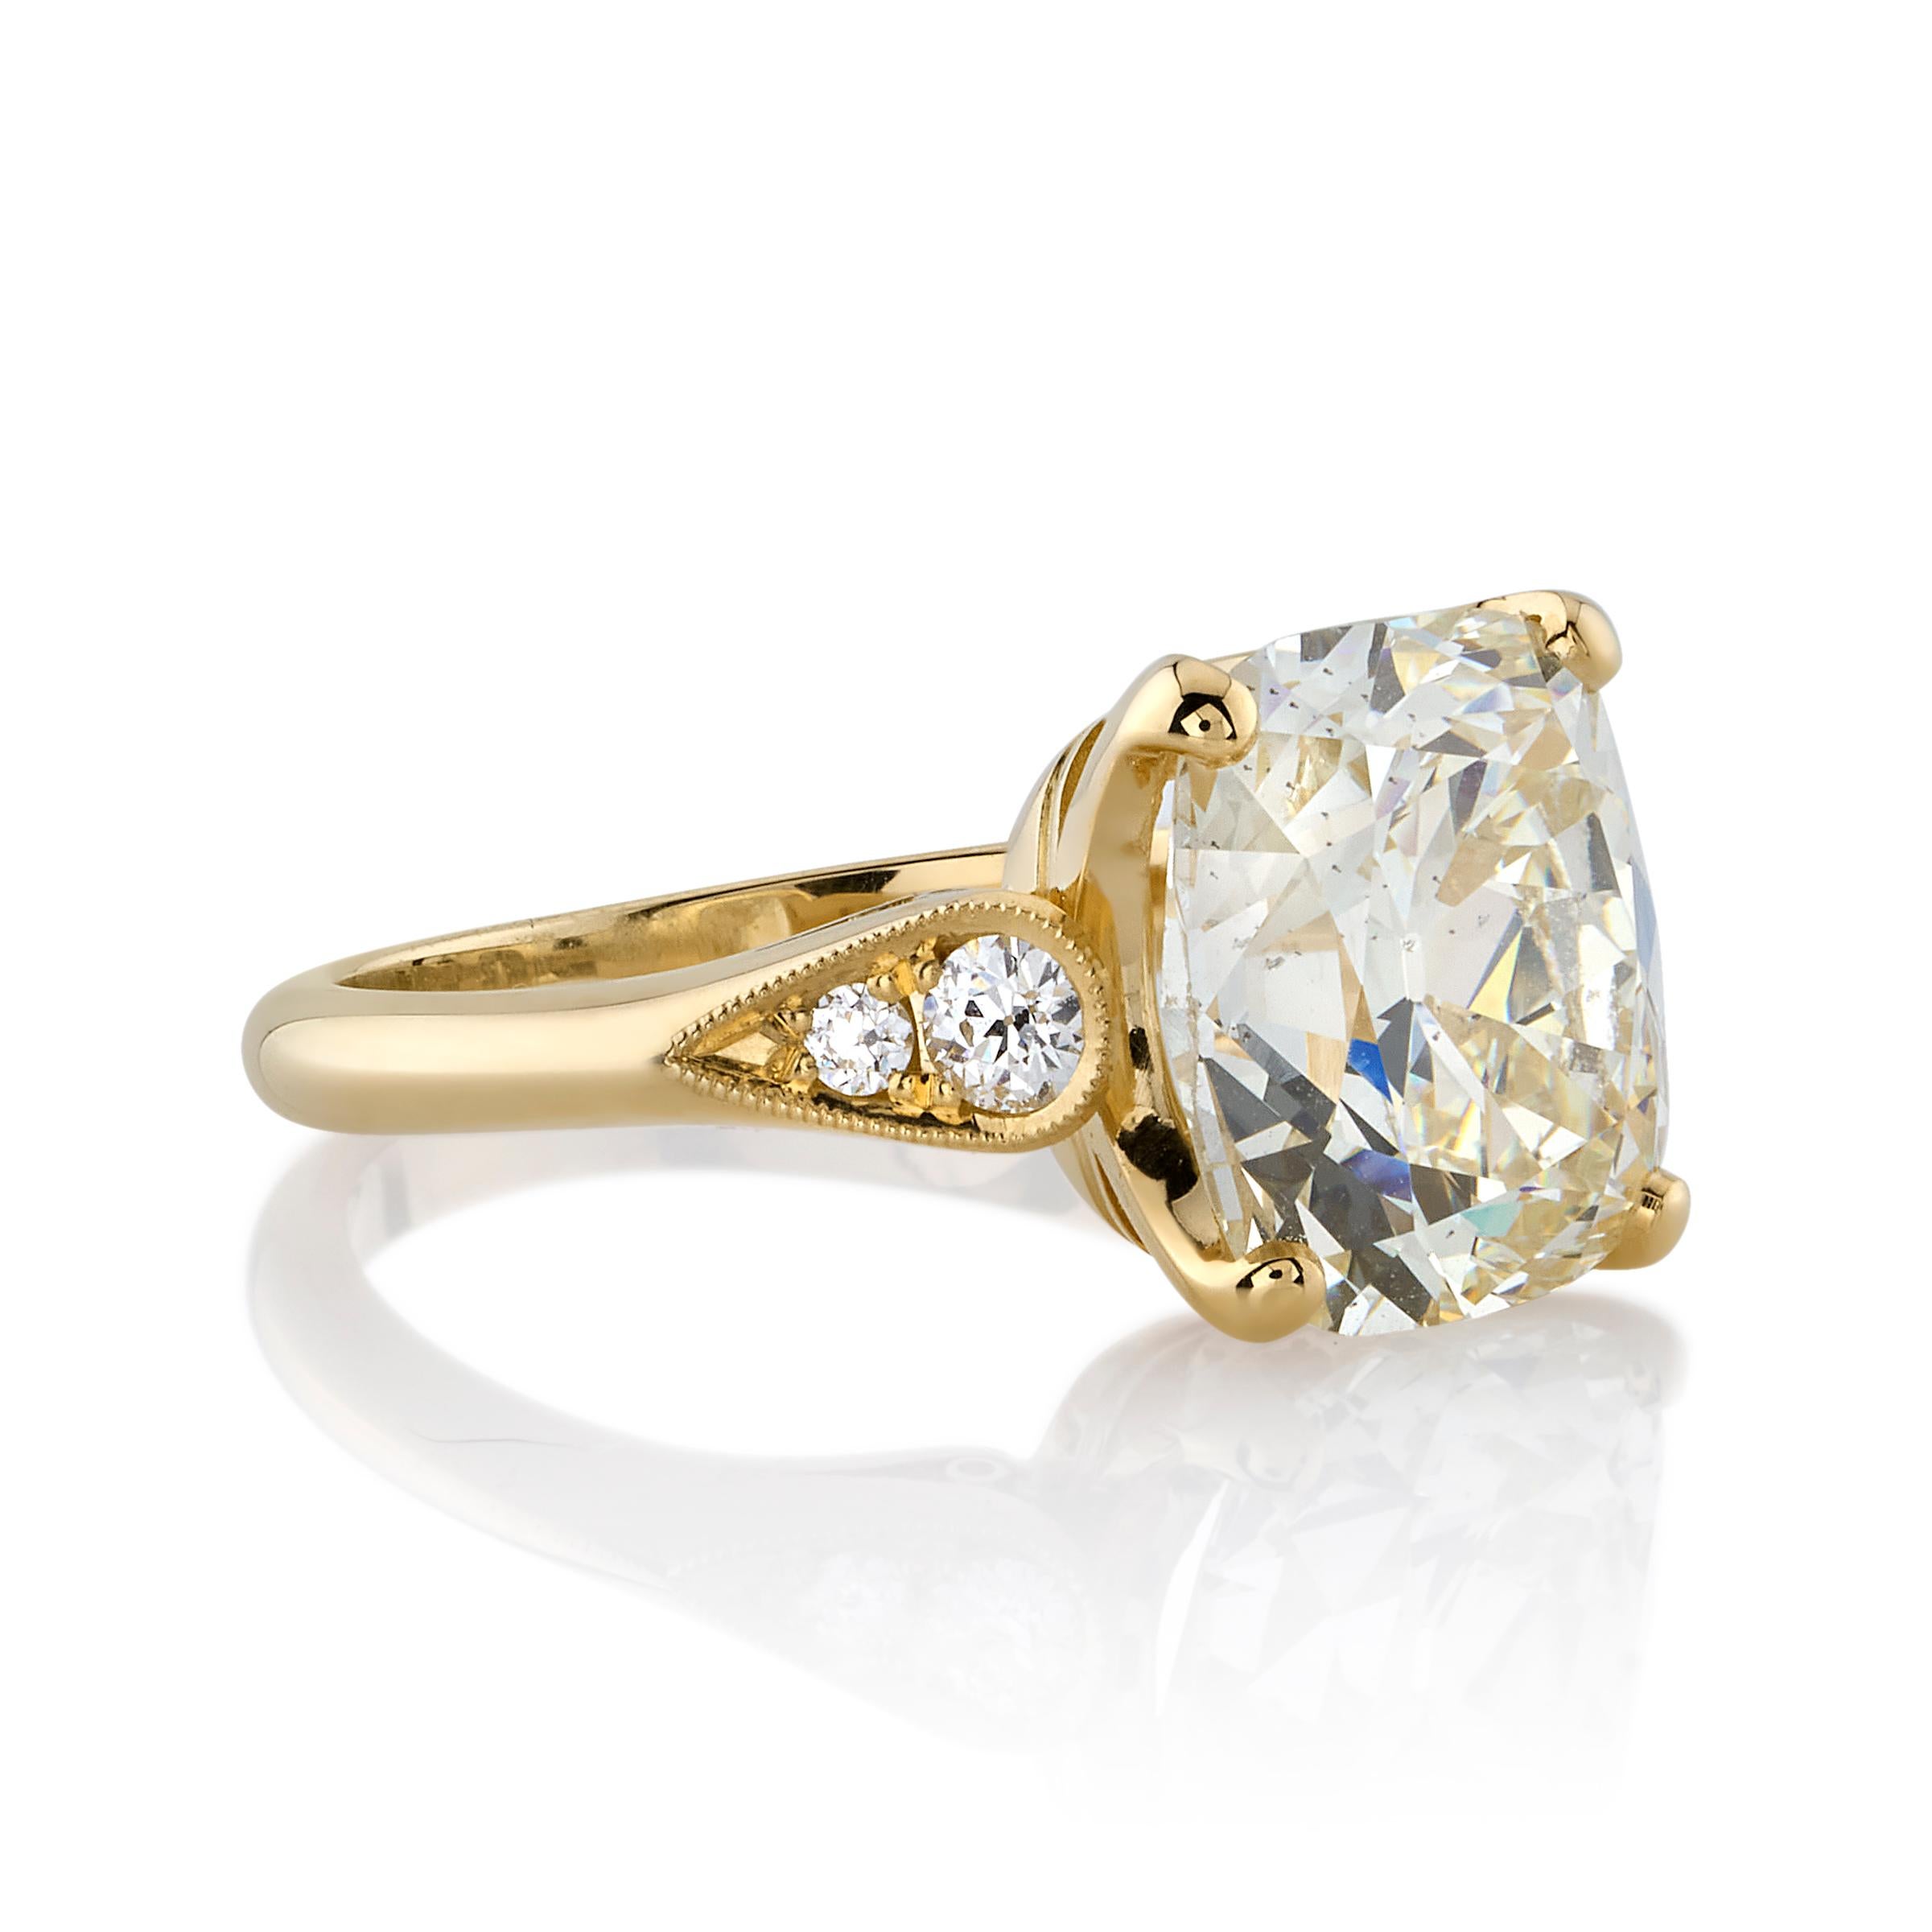 4.96ct O-P/SI2 GIA certified antique Cushion cut diamond with 0.18ctw old European cut accent diamonds set in a handcrafted 18K yellow gold mounting.

Ring is currently a size 6 and can be sized to fit.

Our jewelry is made locally in Los Angeles